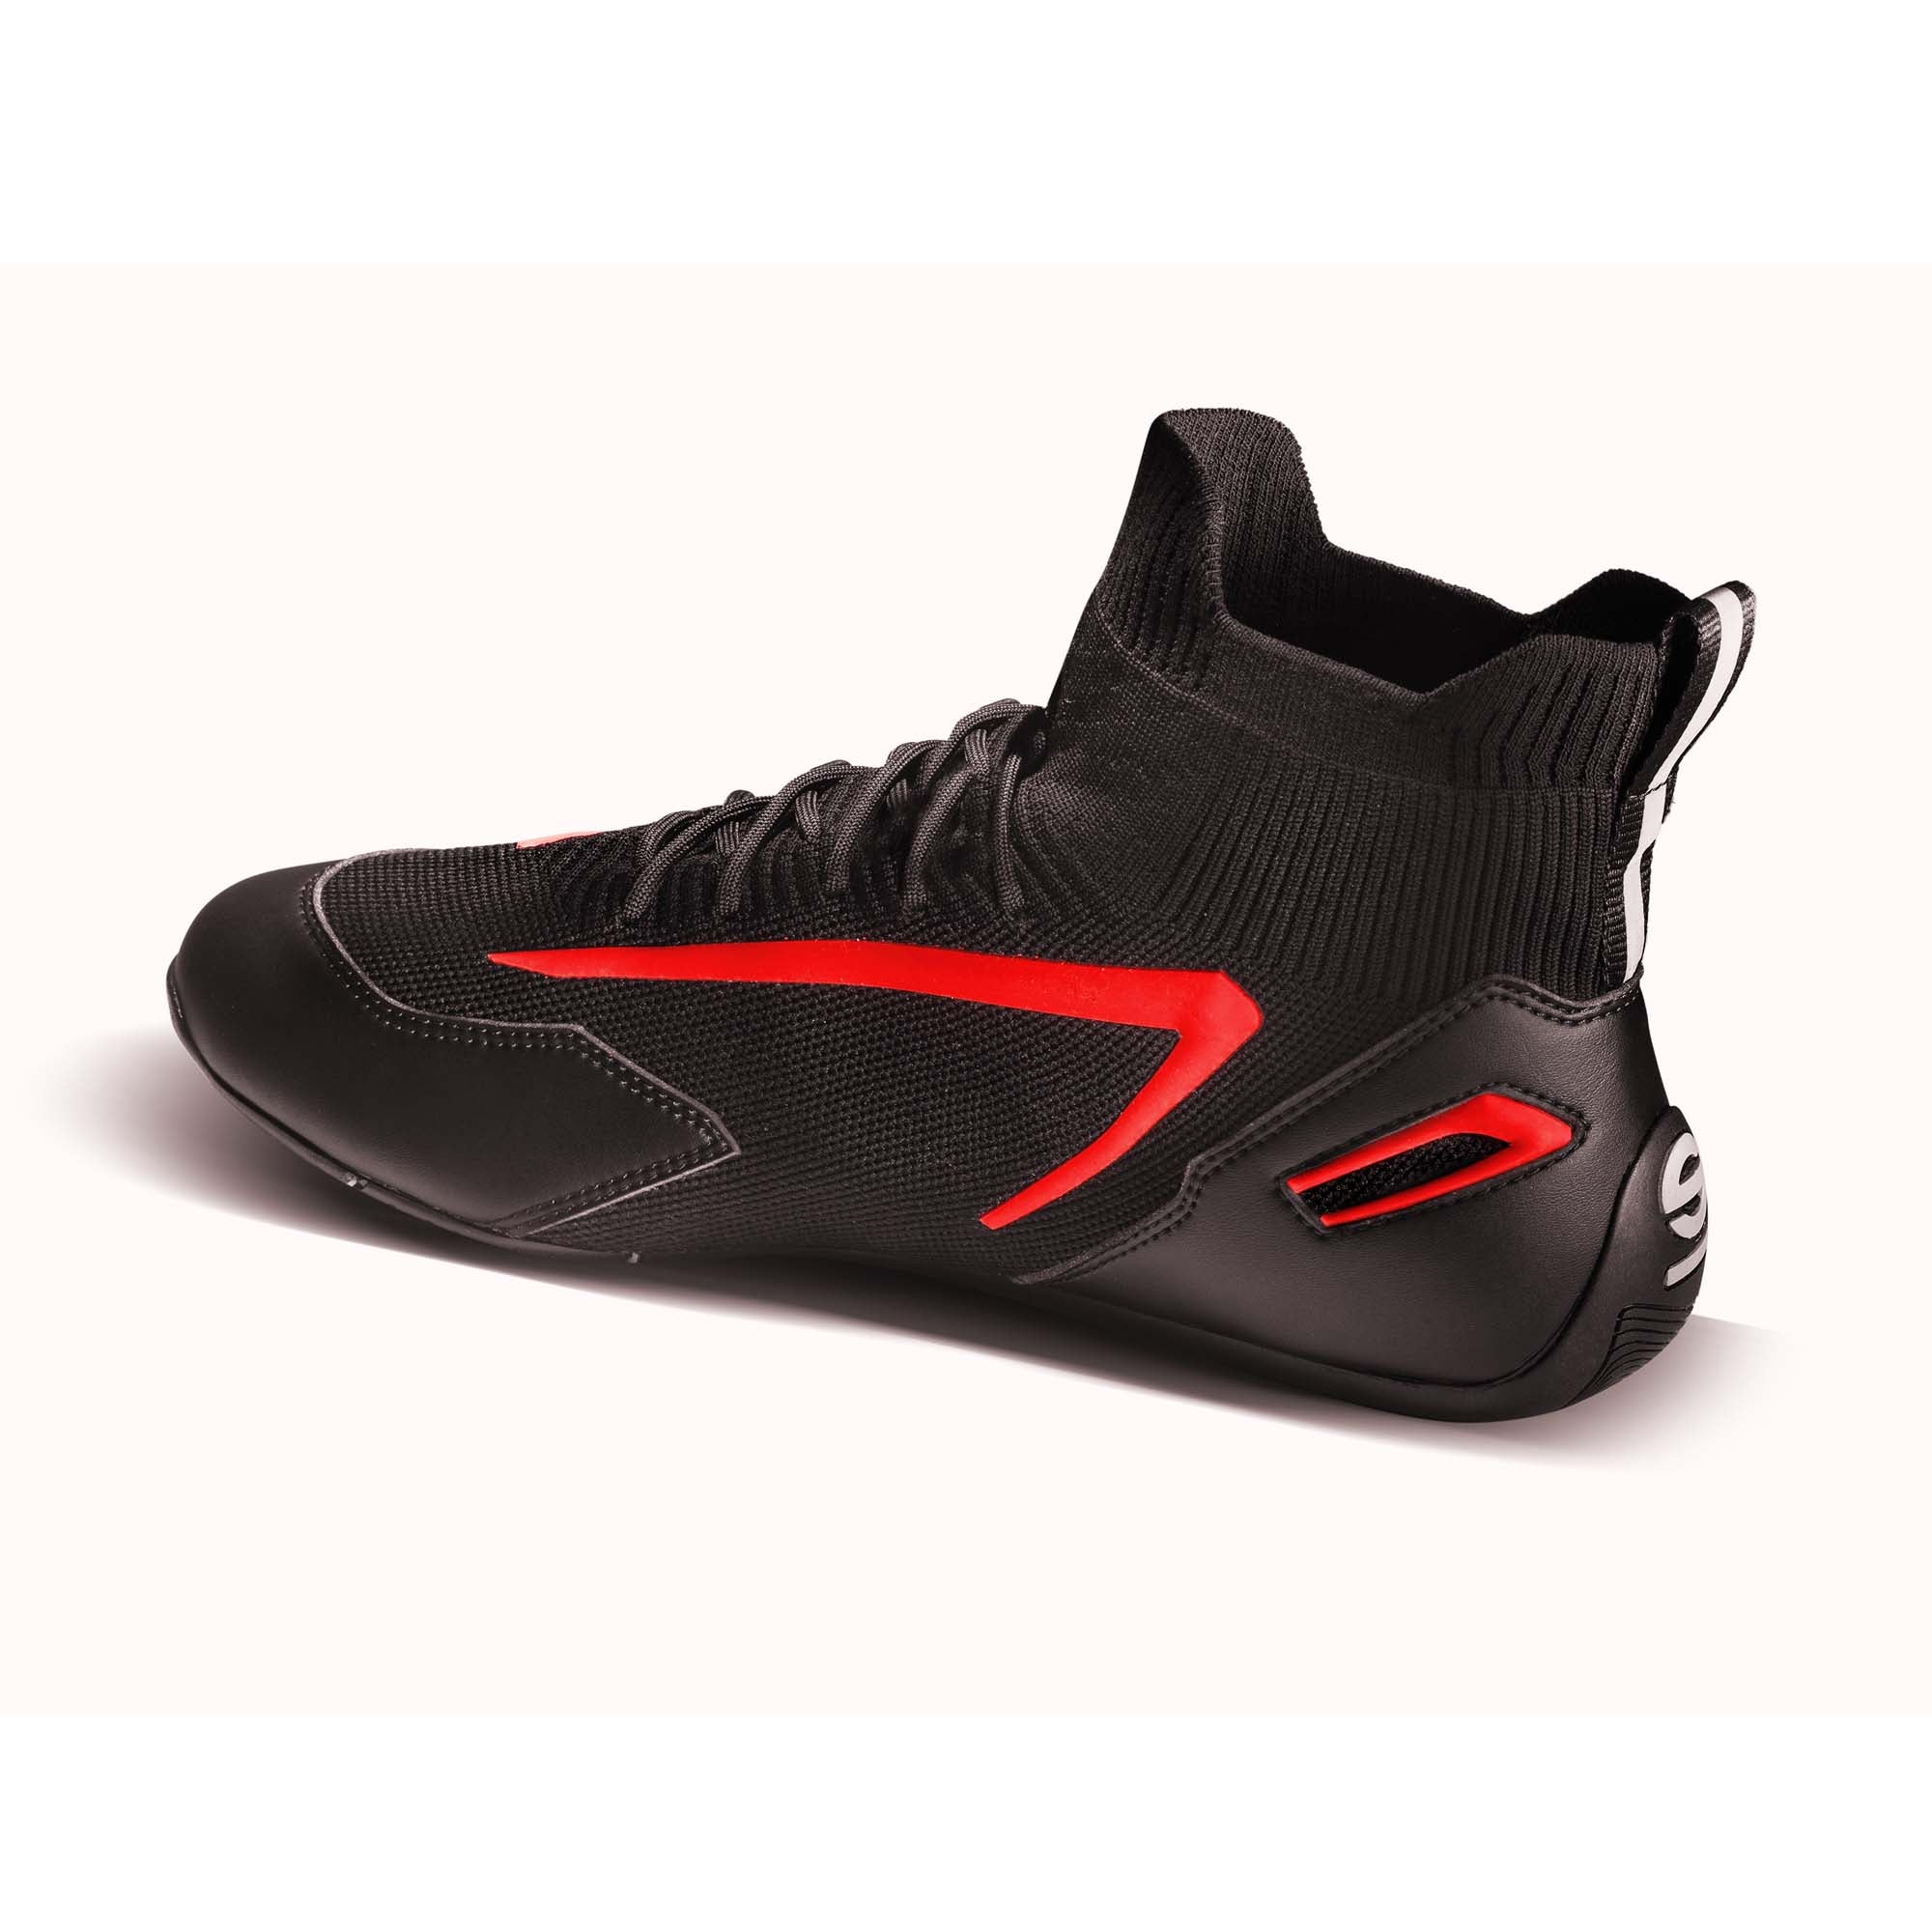 Sparco Hyperdrive Gaming Shoes